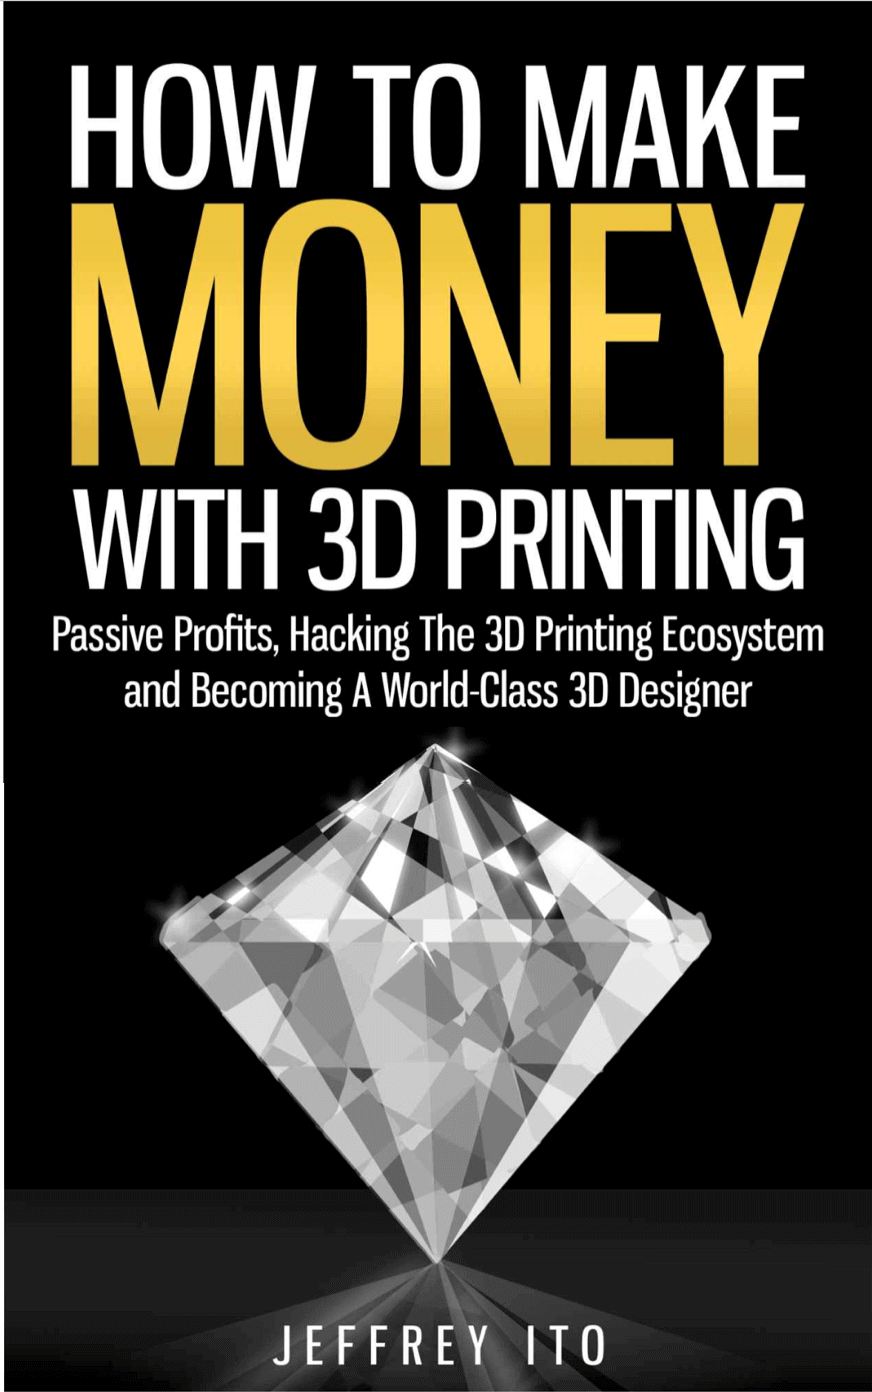 Jeffrey Itos "How to Make Money With 3D Printing"